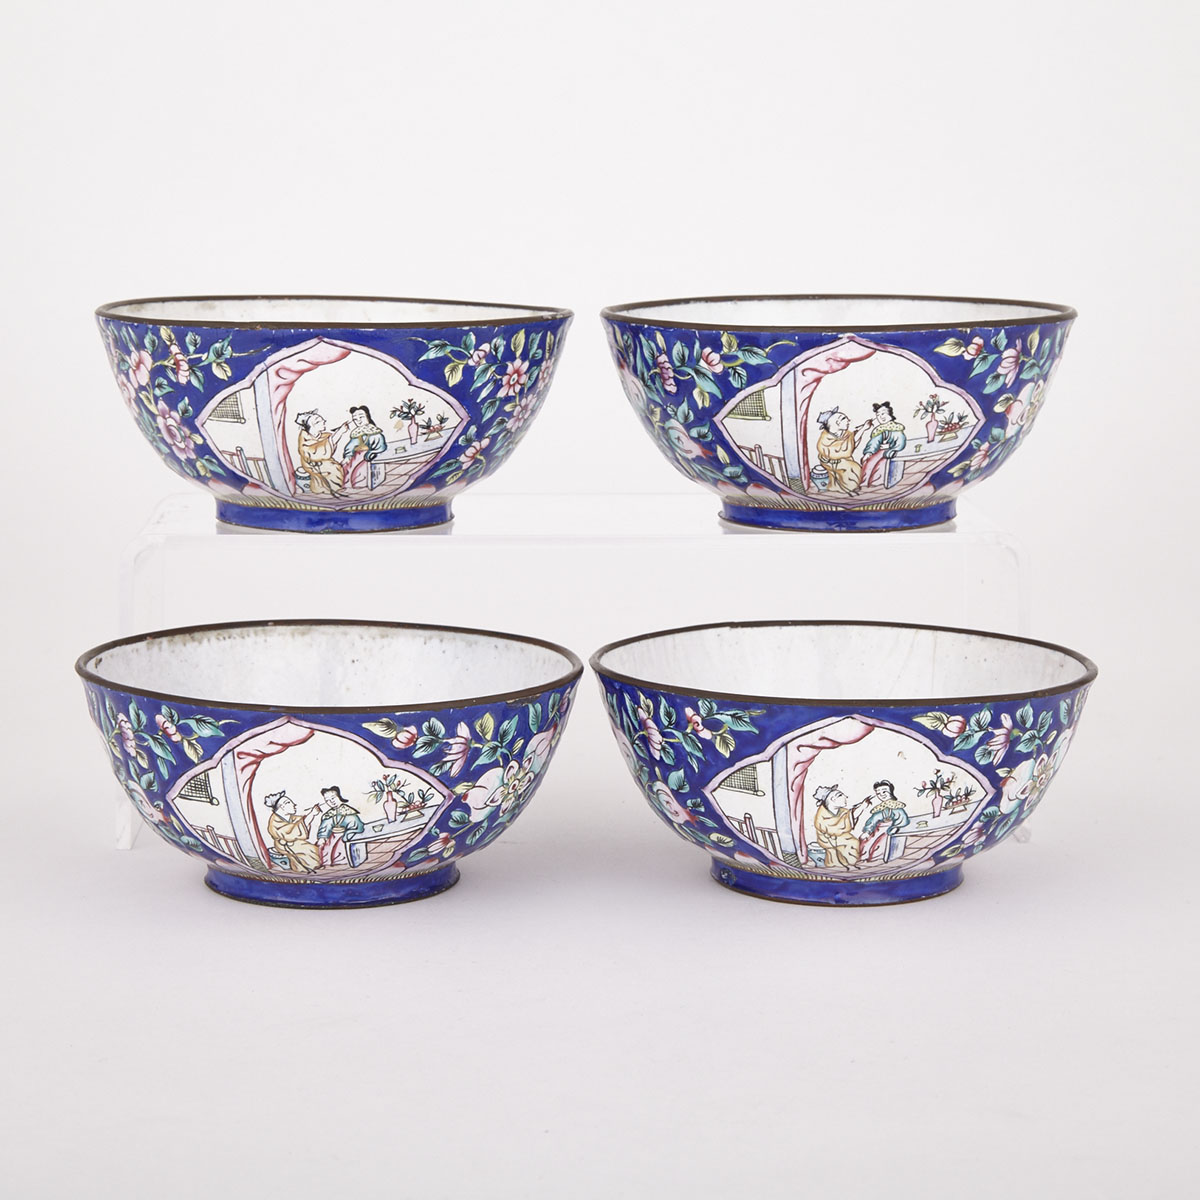 Set of Four Famille Rose Enamel Copper Bowls, Early 20th Century